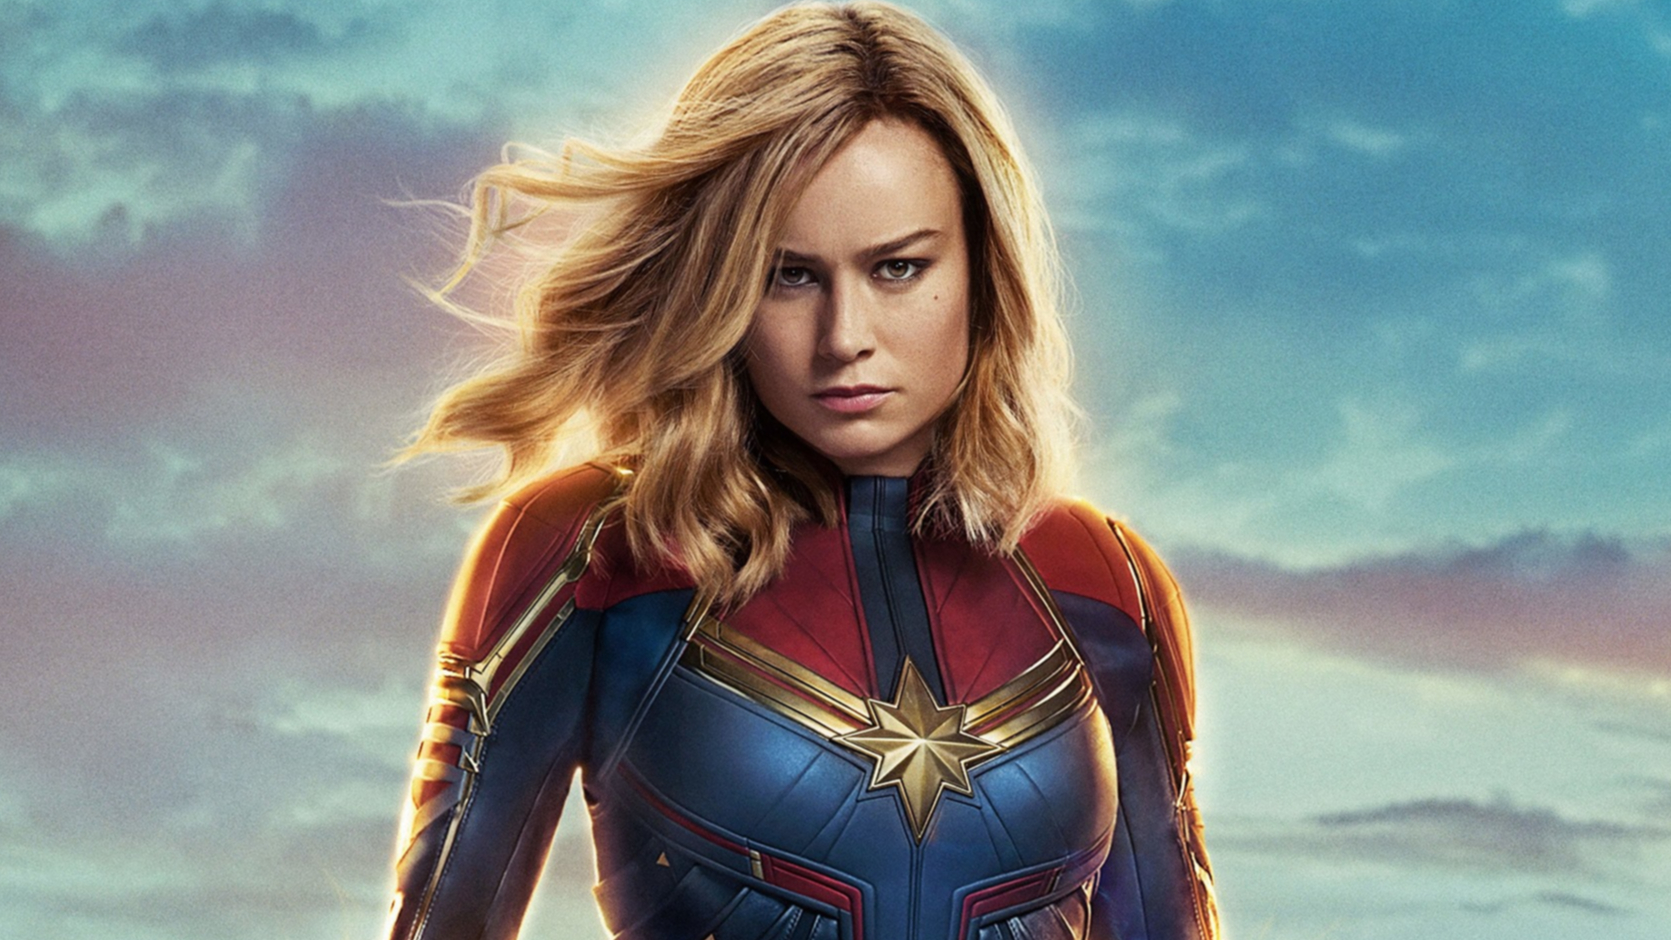 Brie Larson Drama Is Causing Serious Trouble Behind The Scenes Of The Marvels?